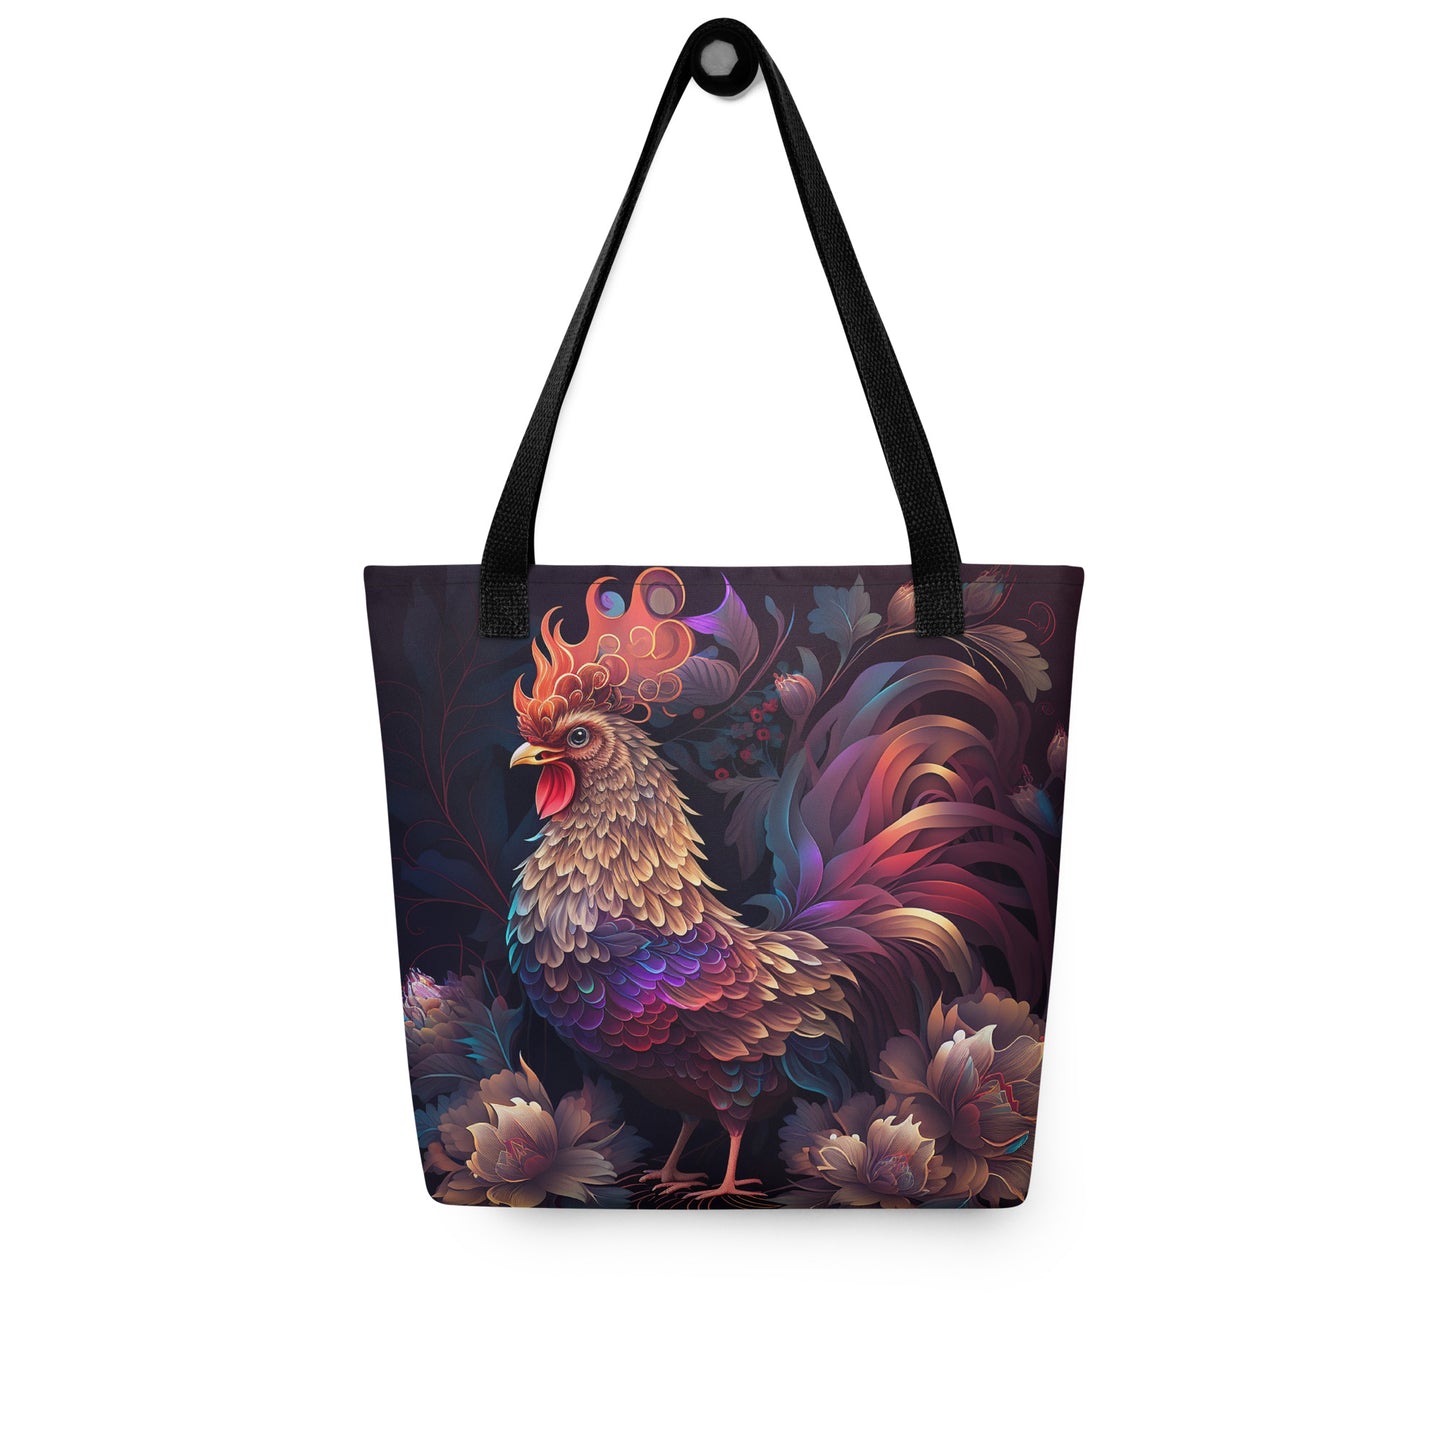 ROOSTER TOTE BAG